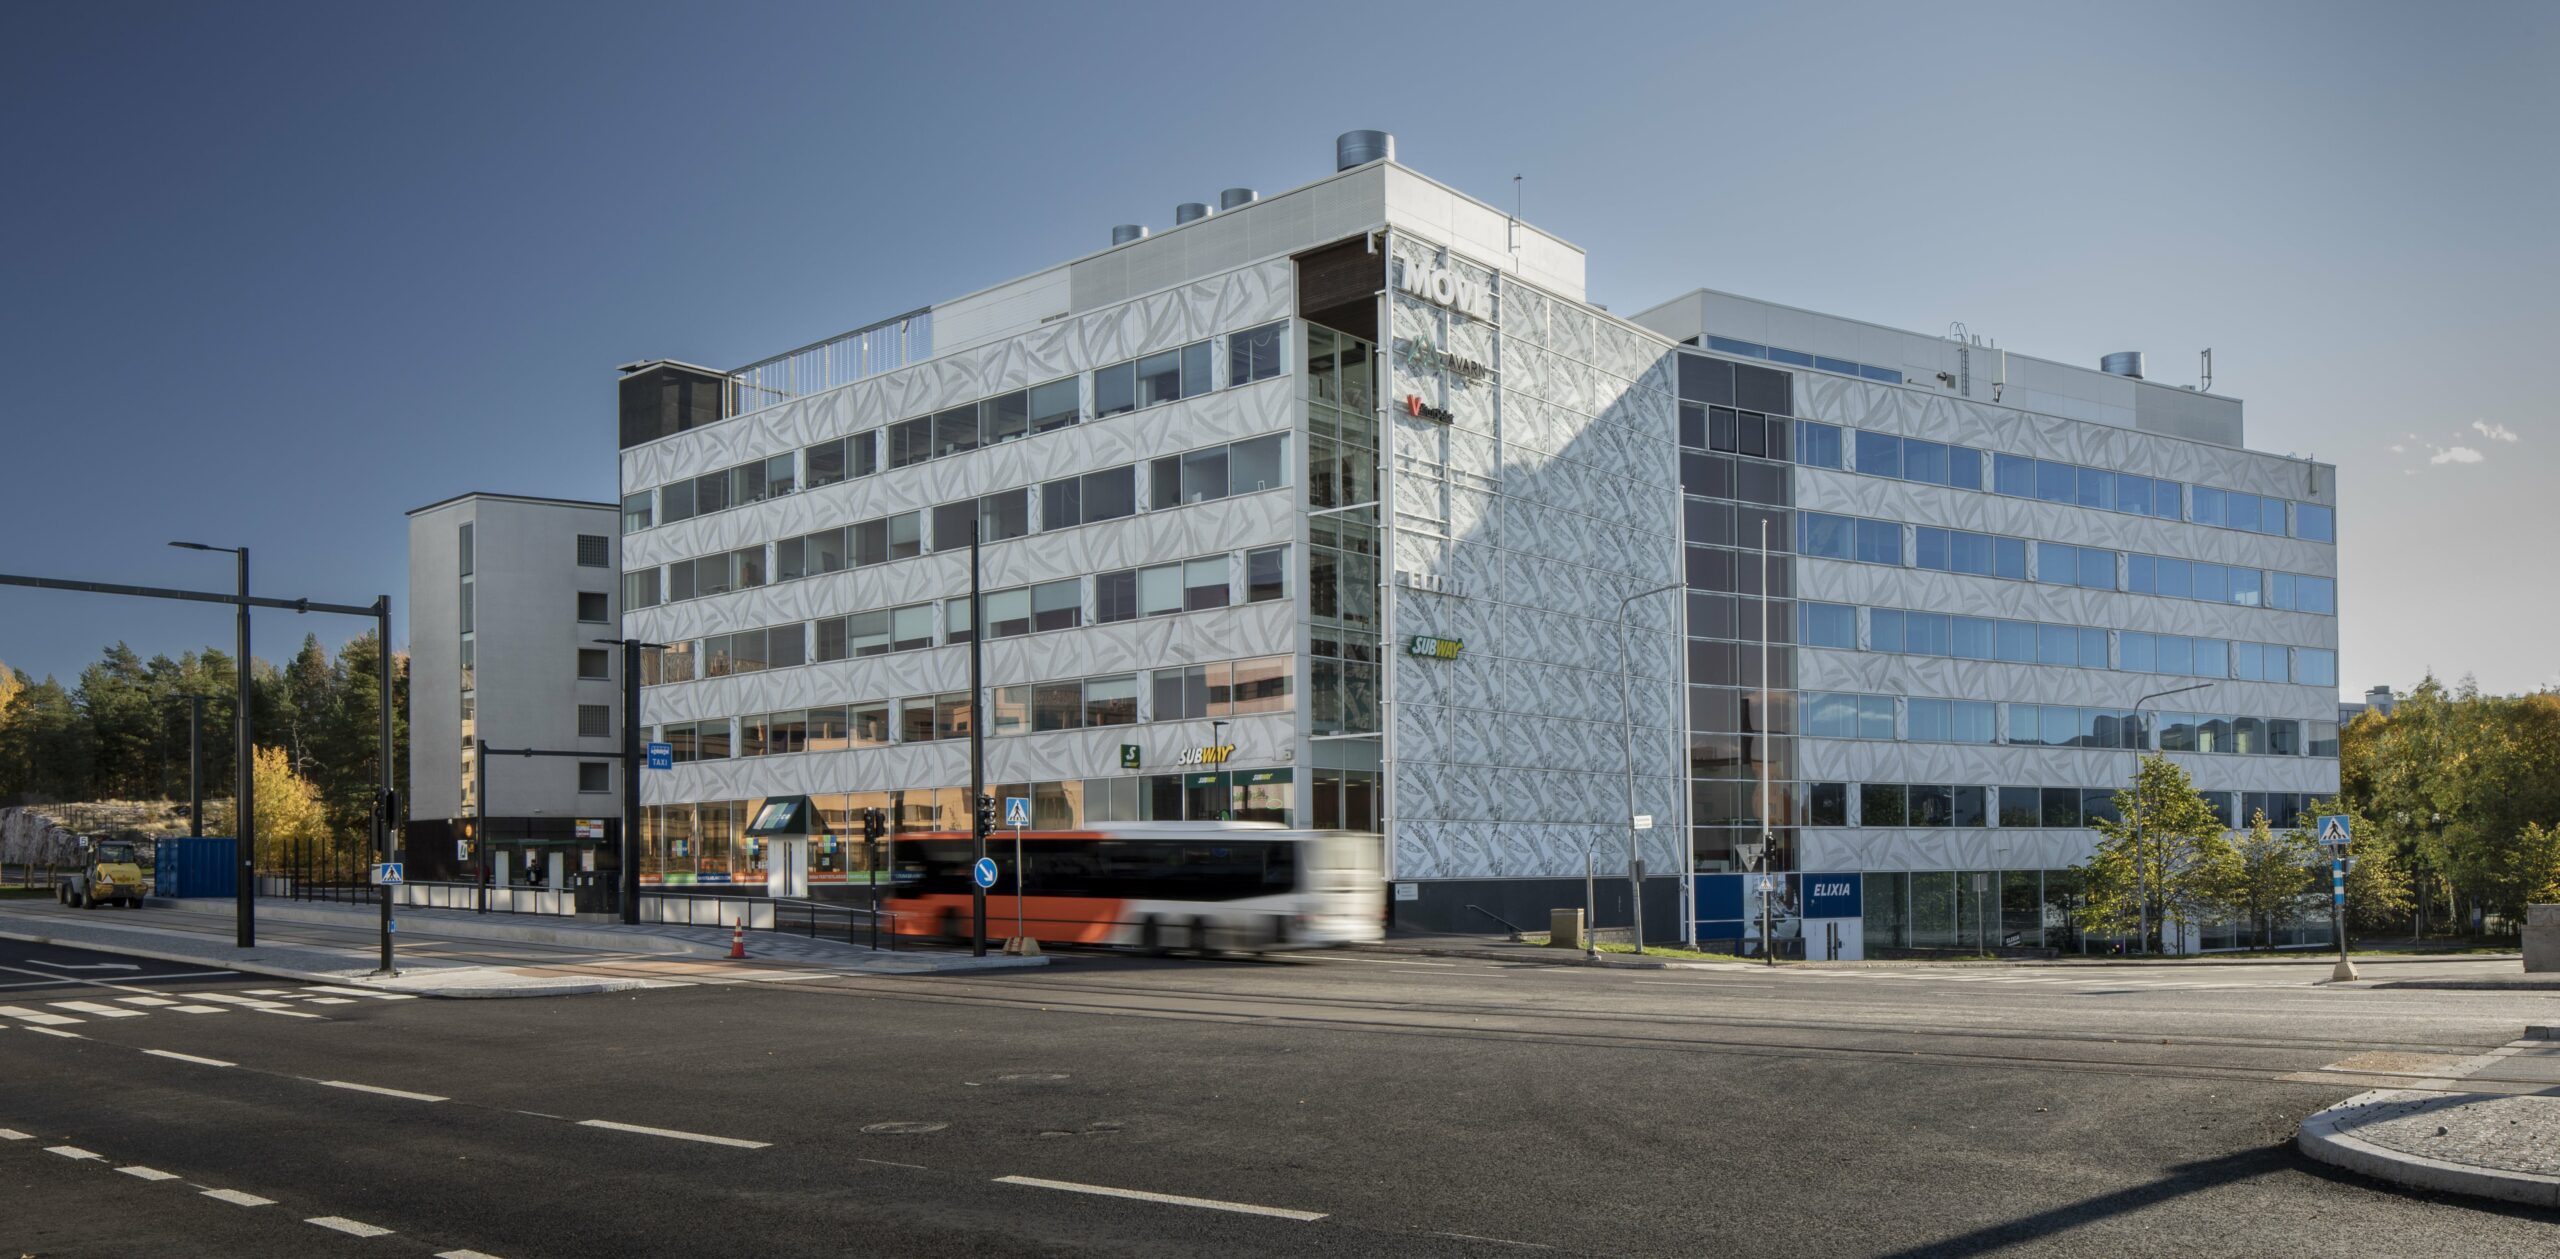 Featured image for “Trevian’s Move attracts companies back to the challenging Pitäjänmäki area in Helsinki”